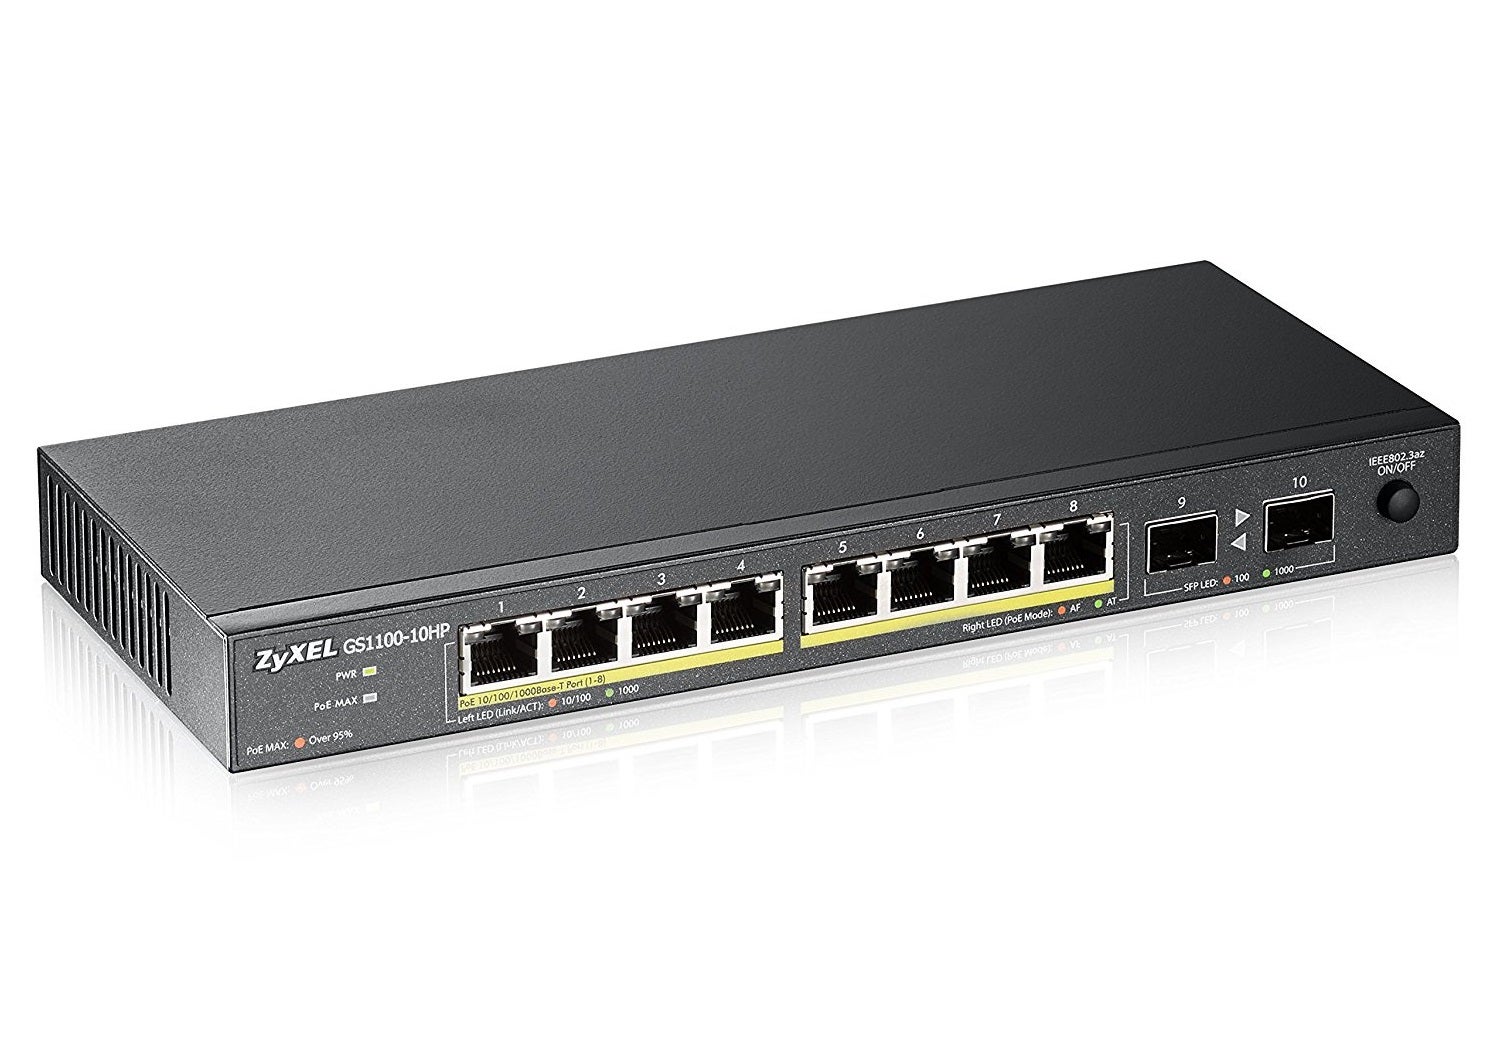 ZyXEL GS1100 Series Unmanaged PoE+ Gigabit Combo Switches Image